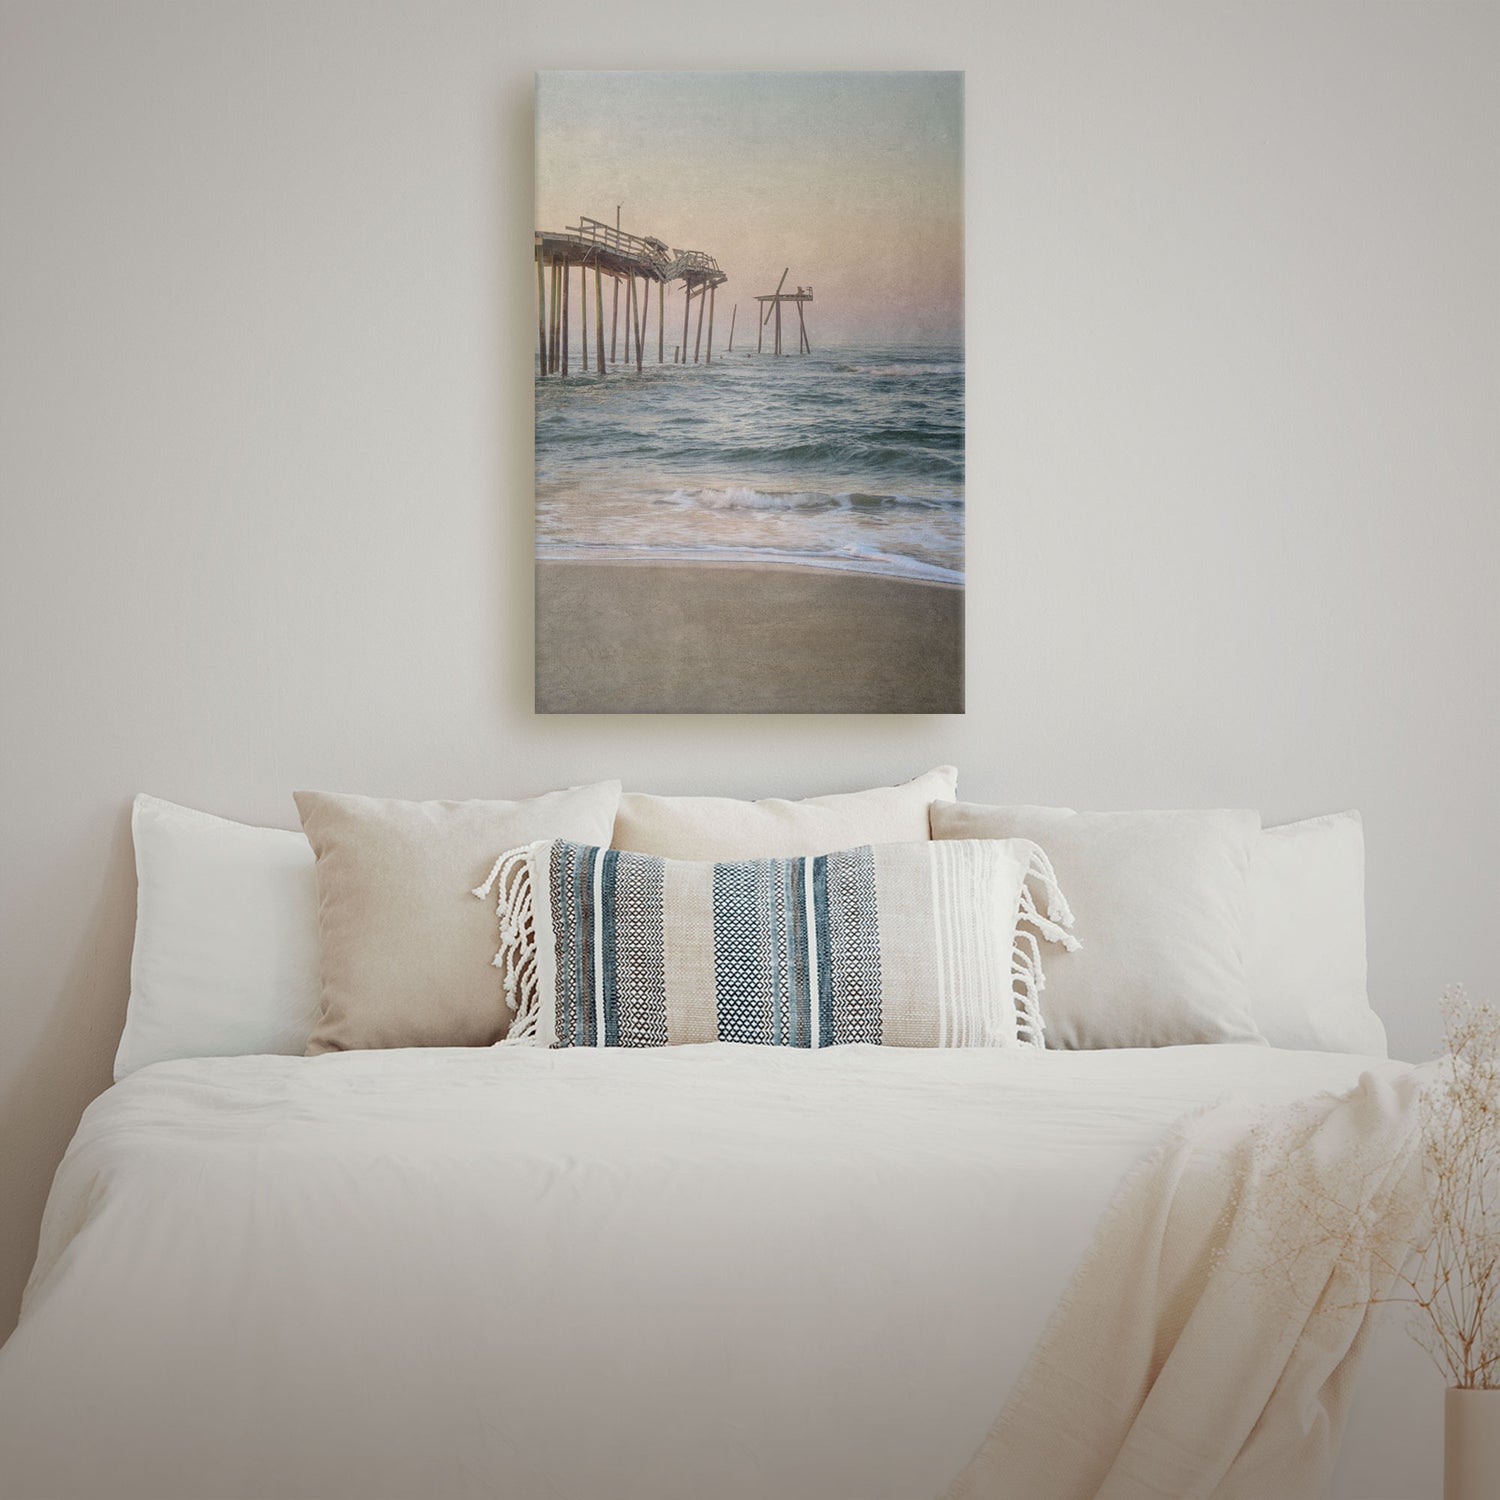 A captivating Frisco Pier Vintage Canvas showcasing the iconic Outer Banks landmark in North Carolina. The canvas features a textured, weathered aesthetic, adding depth and character to the artwork. Soft pastel hues depict a serene sunset, creating a tranquil atmosphere.